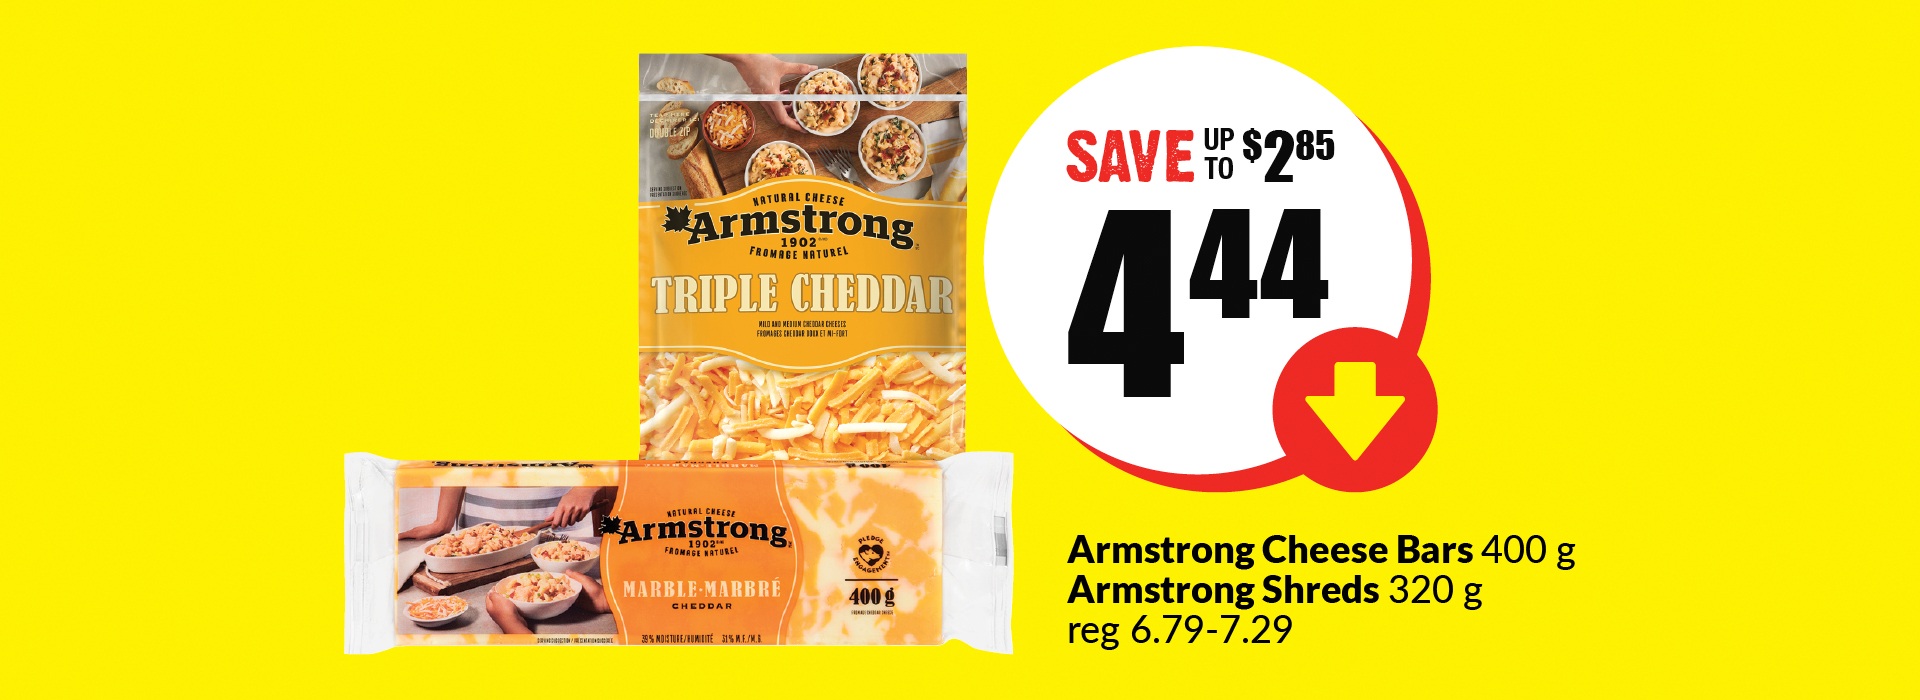 The following image contains the text," Armstrong cheese bars 400g Armstong shreds 320g, reg 6.79-7.29.Â Get them at just $4.44 and save up to &2.85."